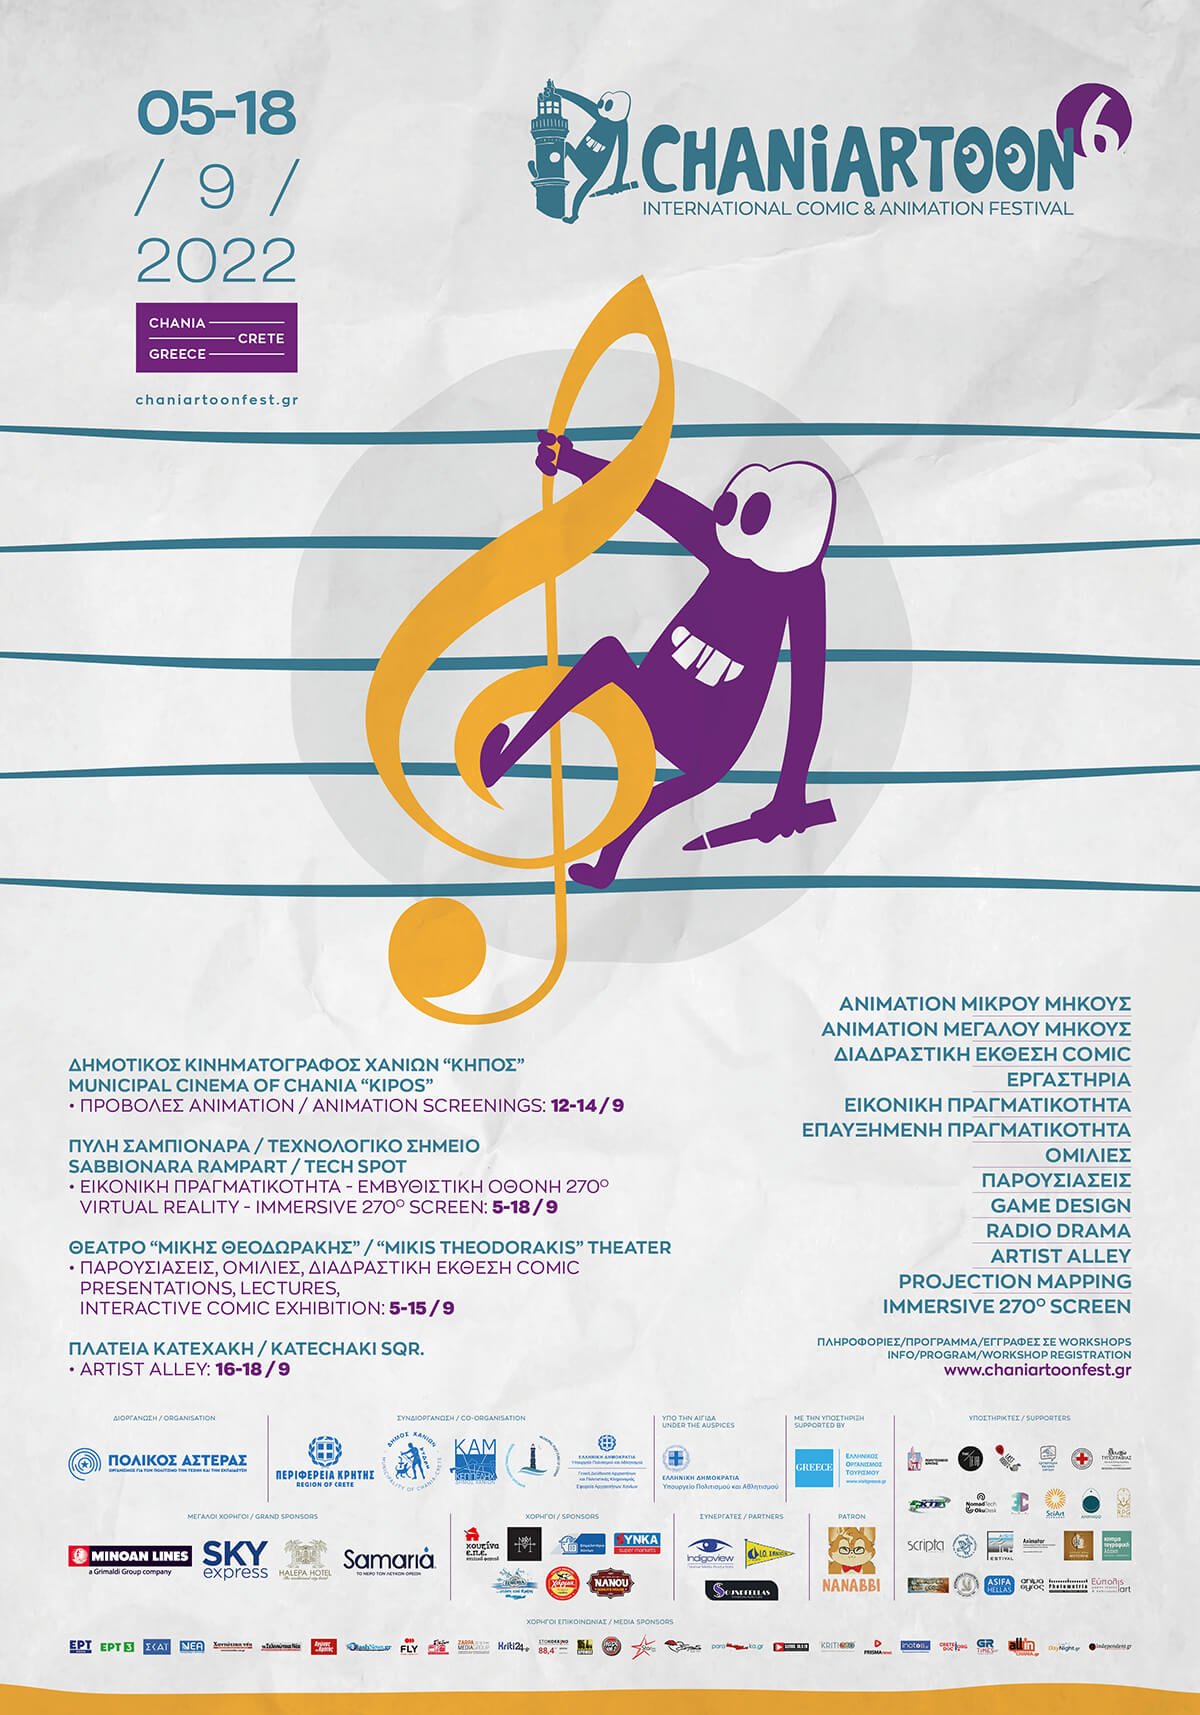 The poster of the Chaniartoon 2022 Festival showing all information and sponsors.